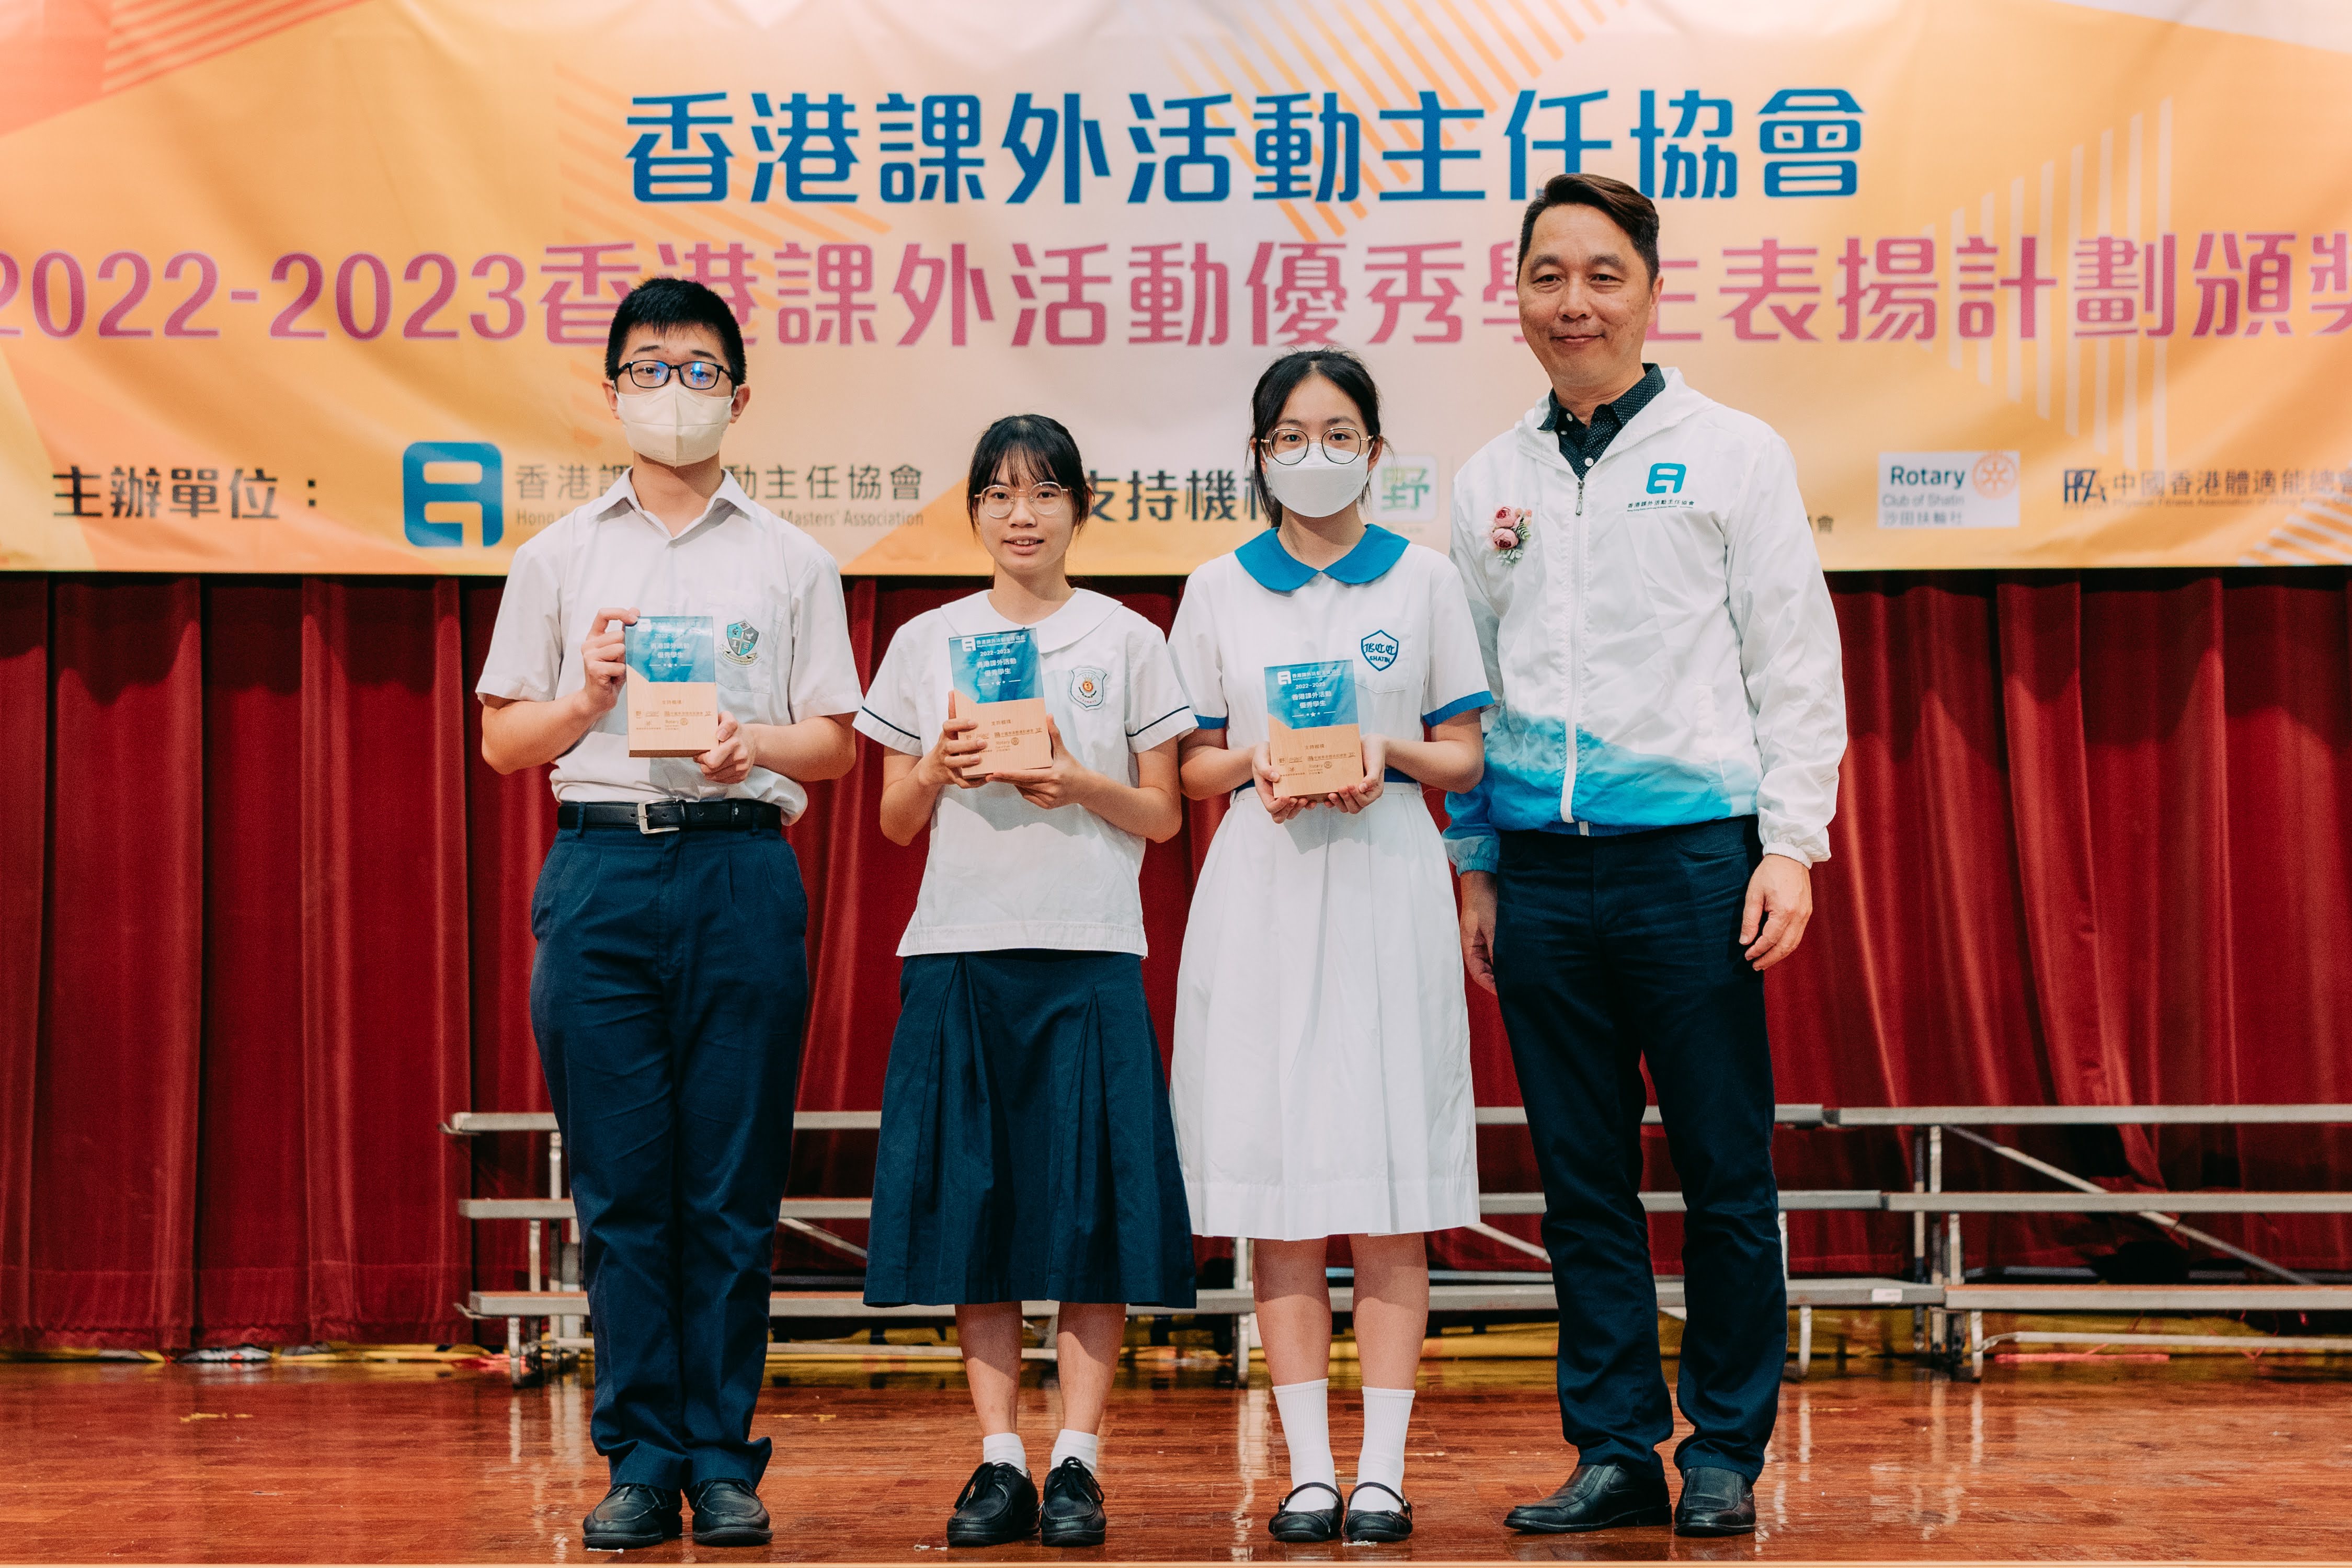 6L Felix YIM Pak Ho was awarded “Student with outstanding performance in extra-curricular activities”